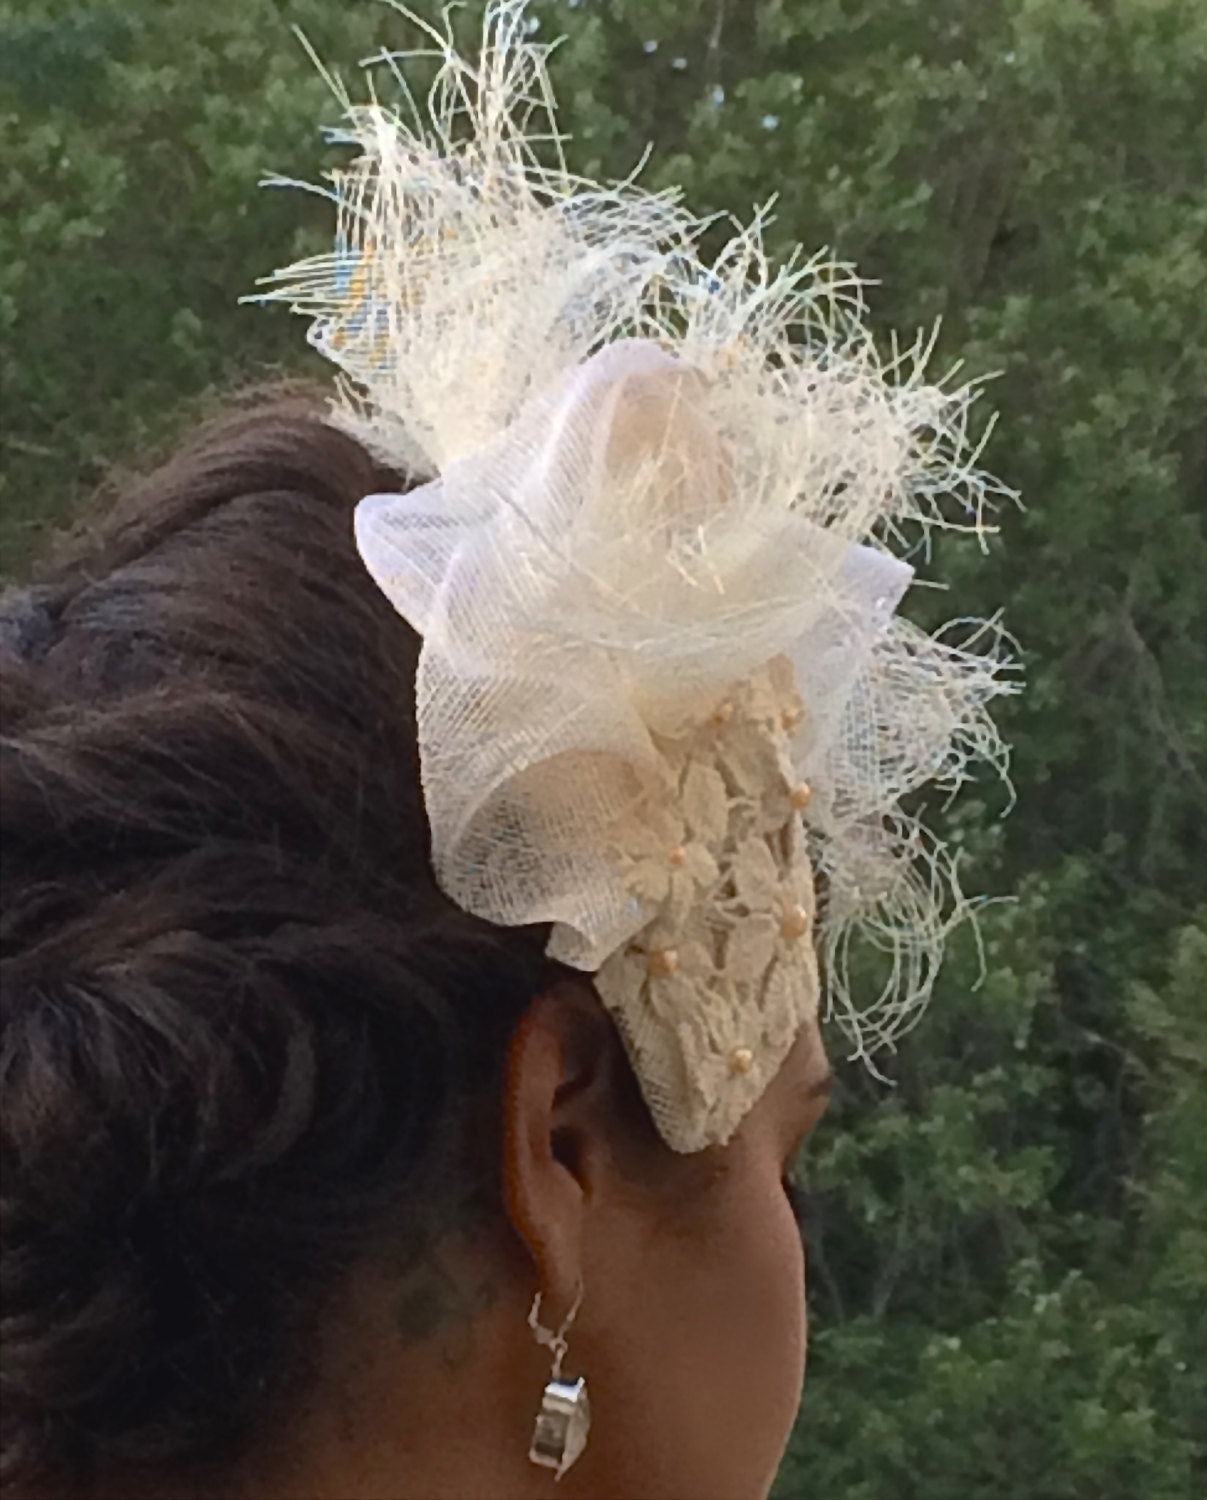 Ivory SINAMAY Wedding Fascinator, Cotton Lace Wedding Hat, Wedding headpiece with Beads-BRIDAL headpiece- Hat for the Bride-Off White Bridal